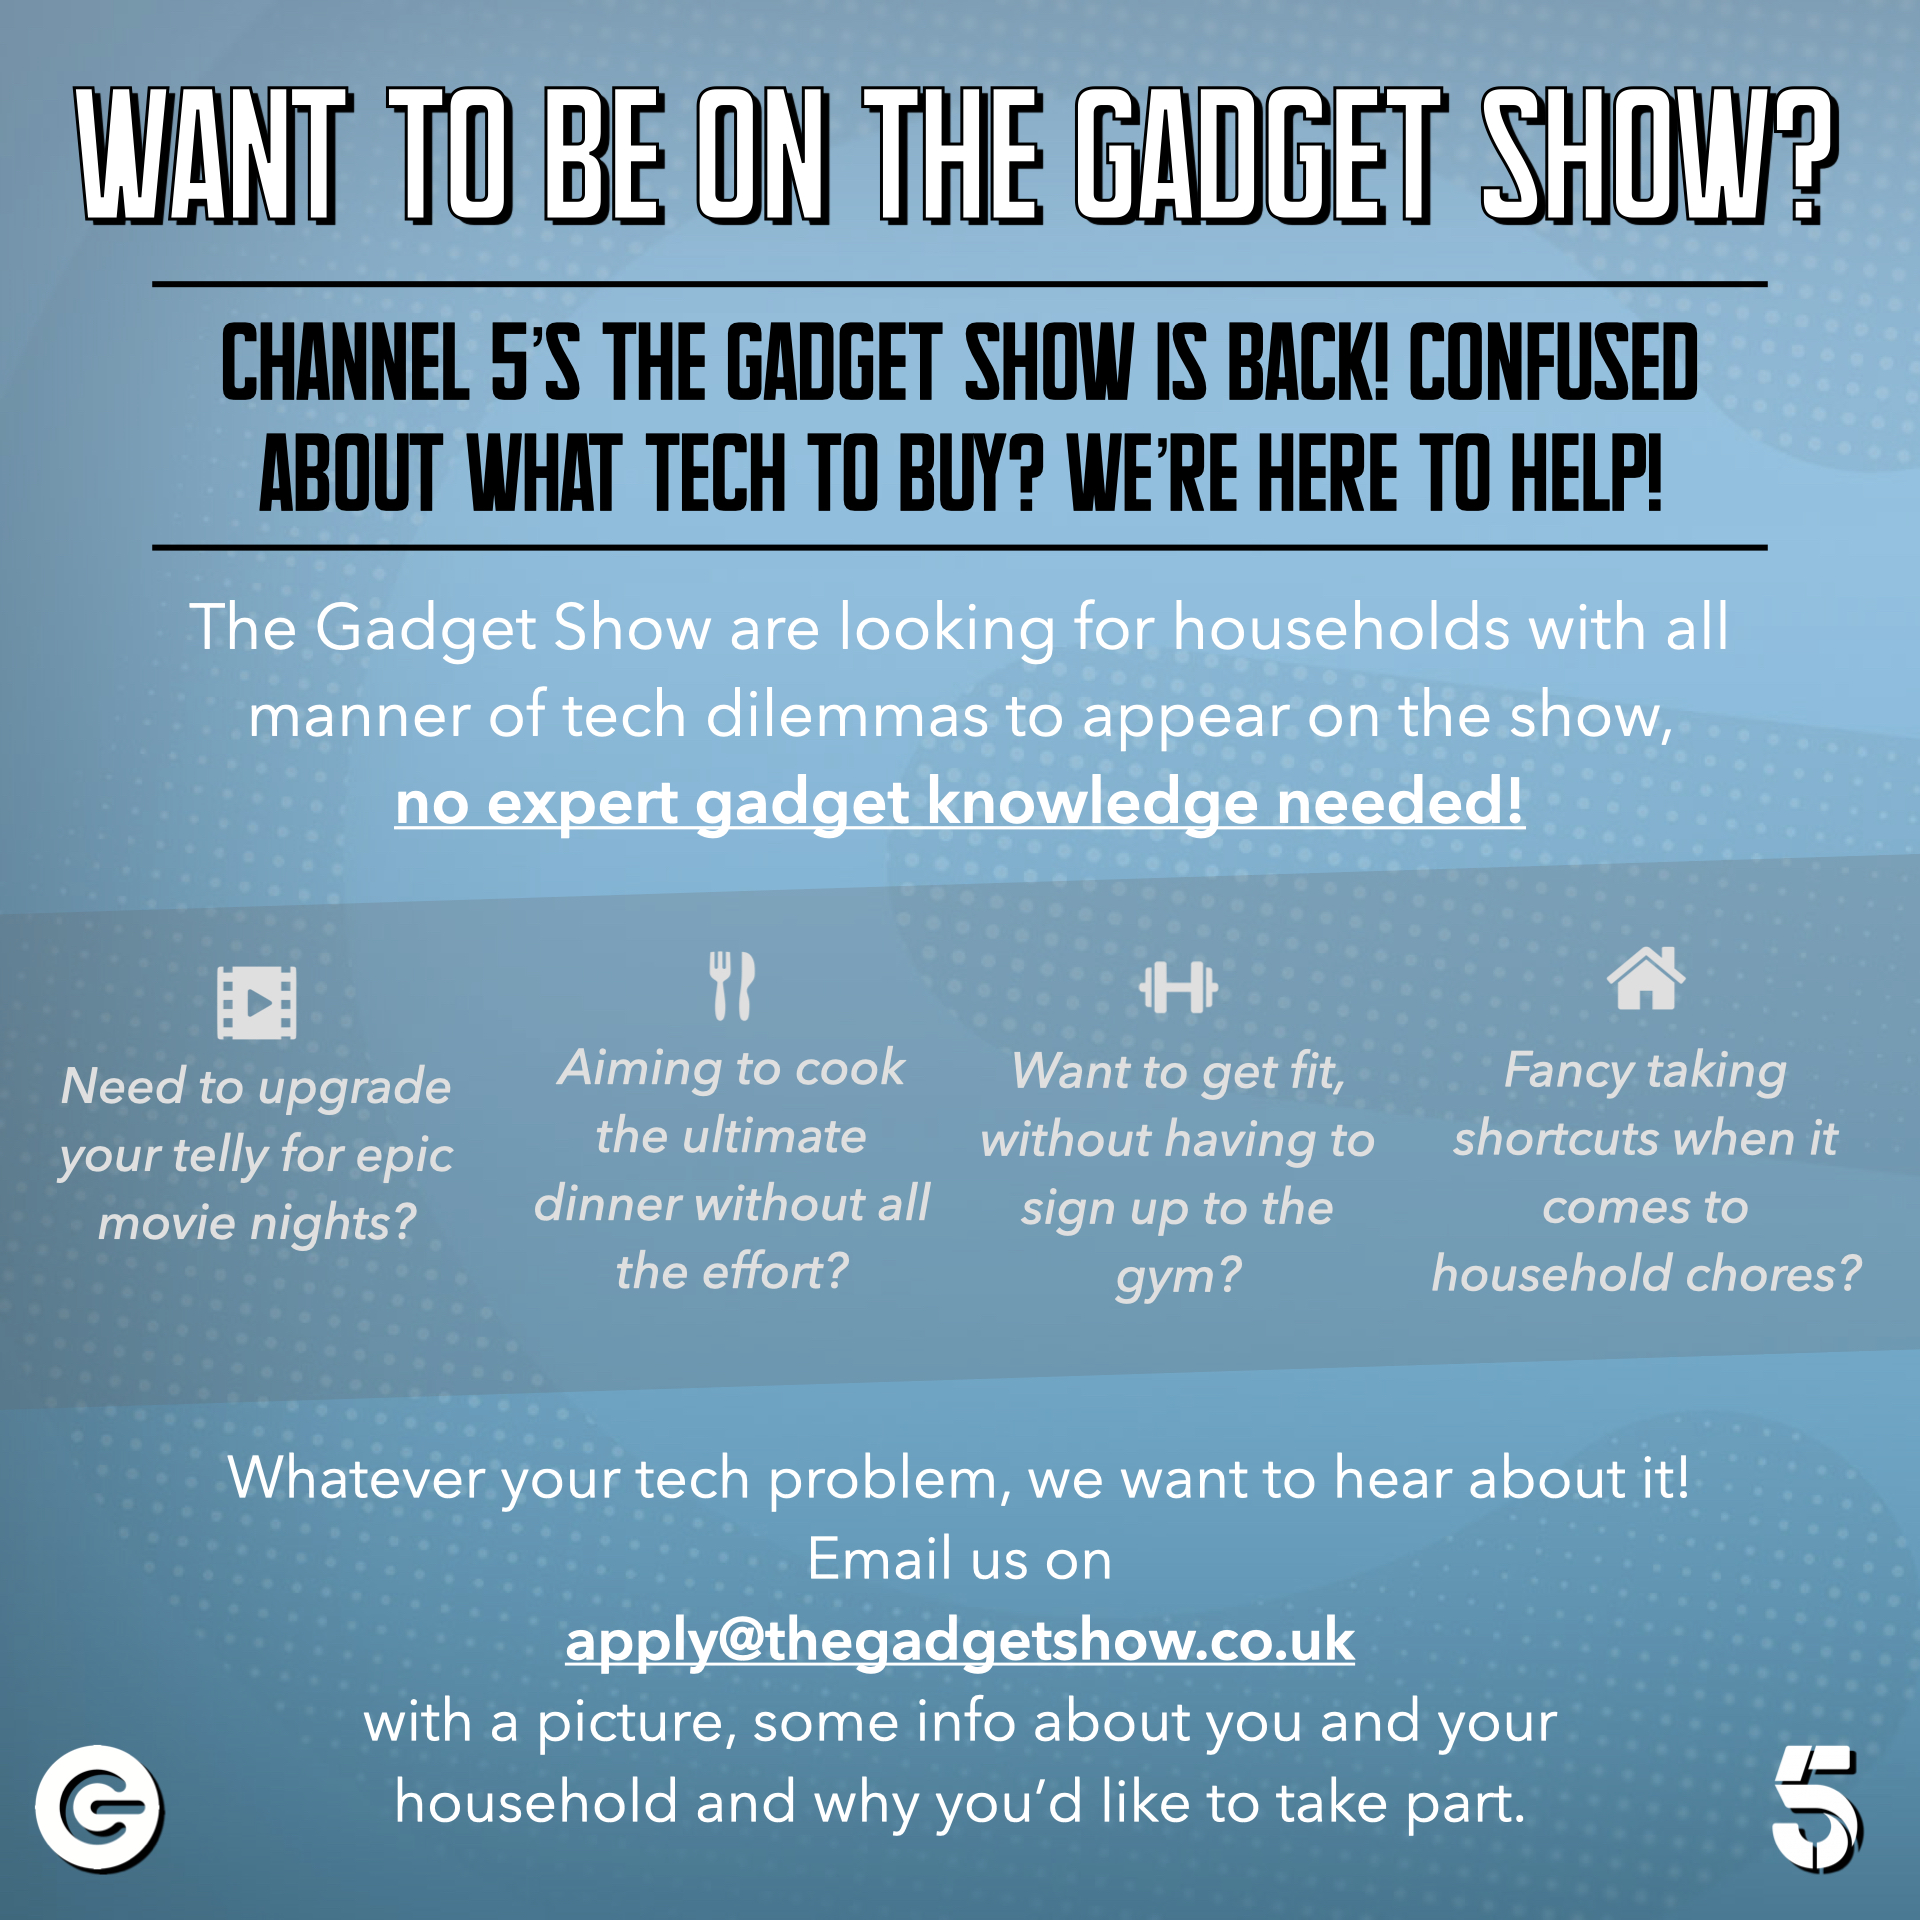 Want To Be On Channel 5’s The Gadget Show?